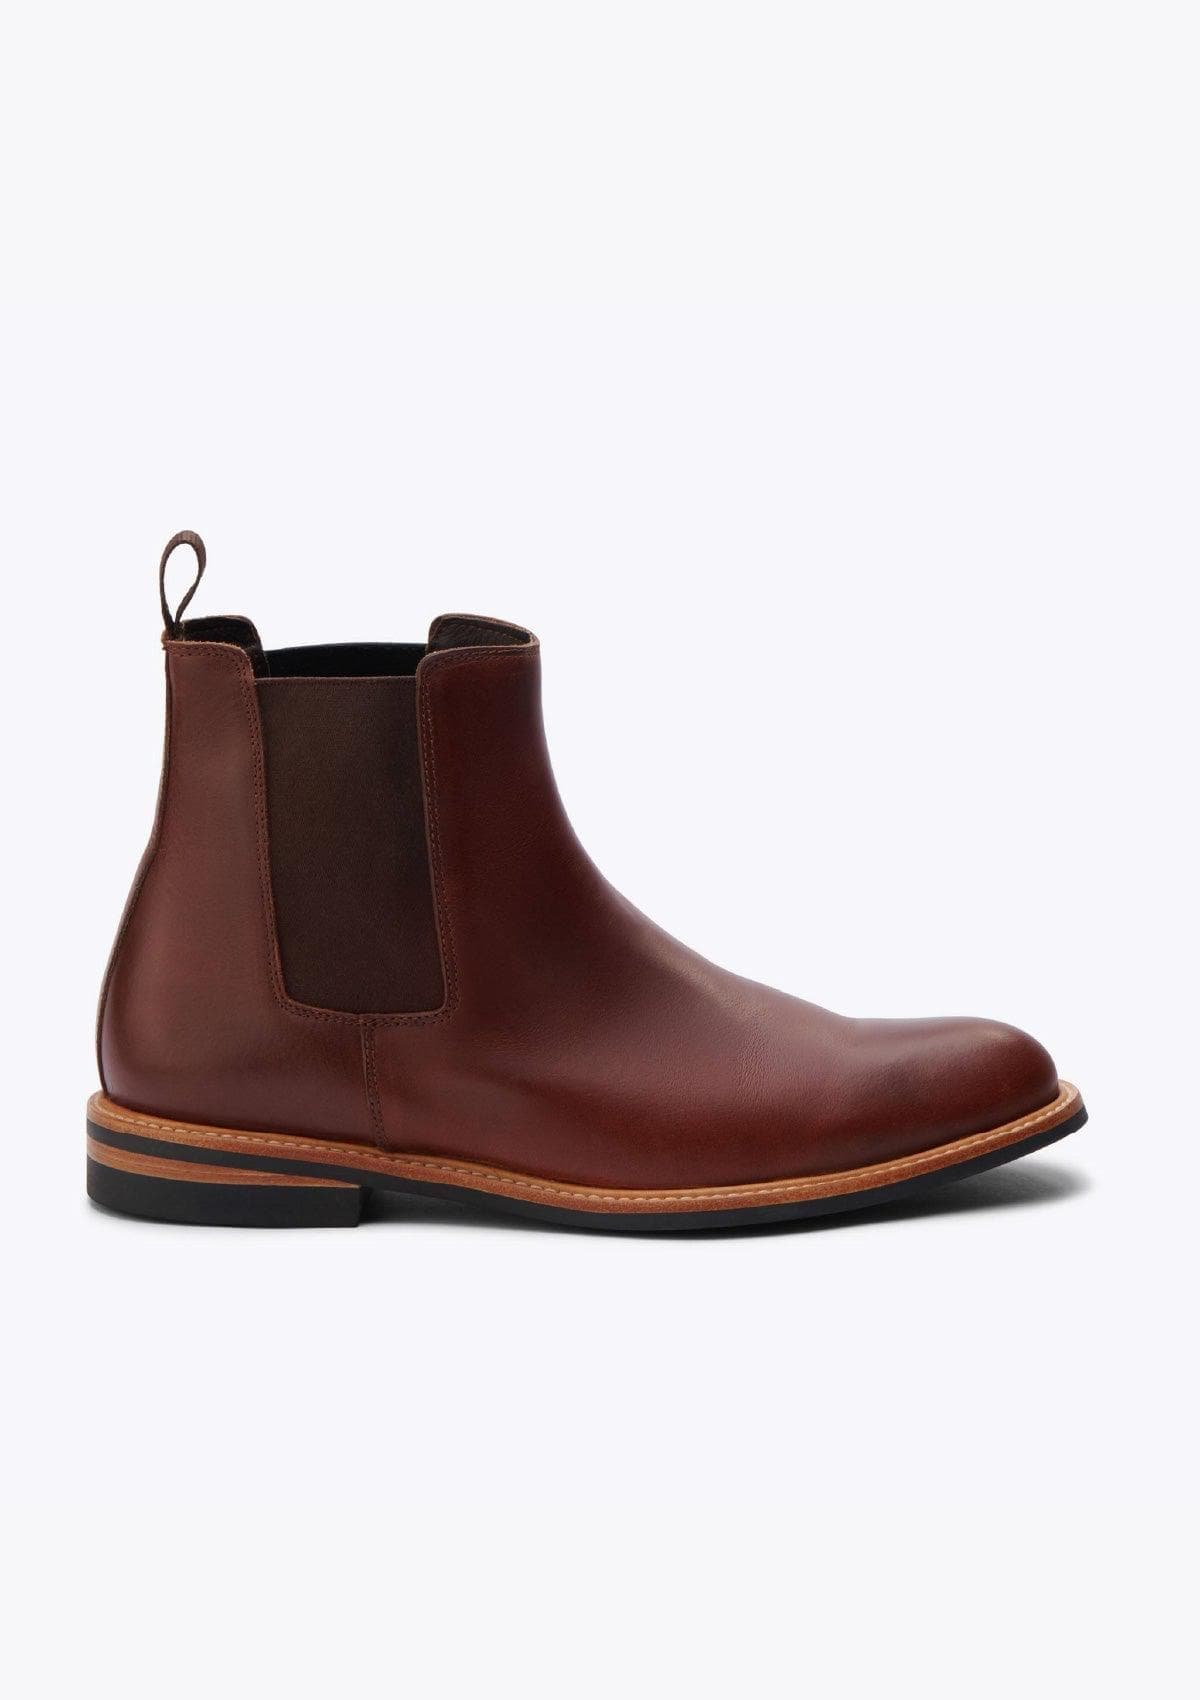 All-Weather Chelsea Boot - Brandy